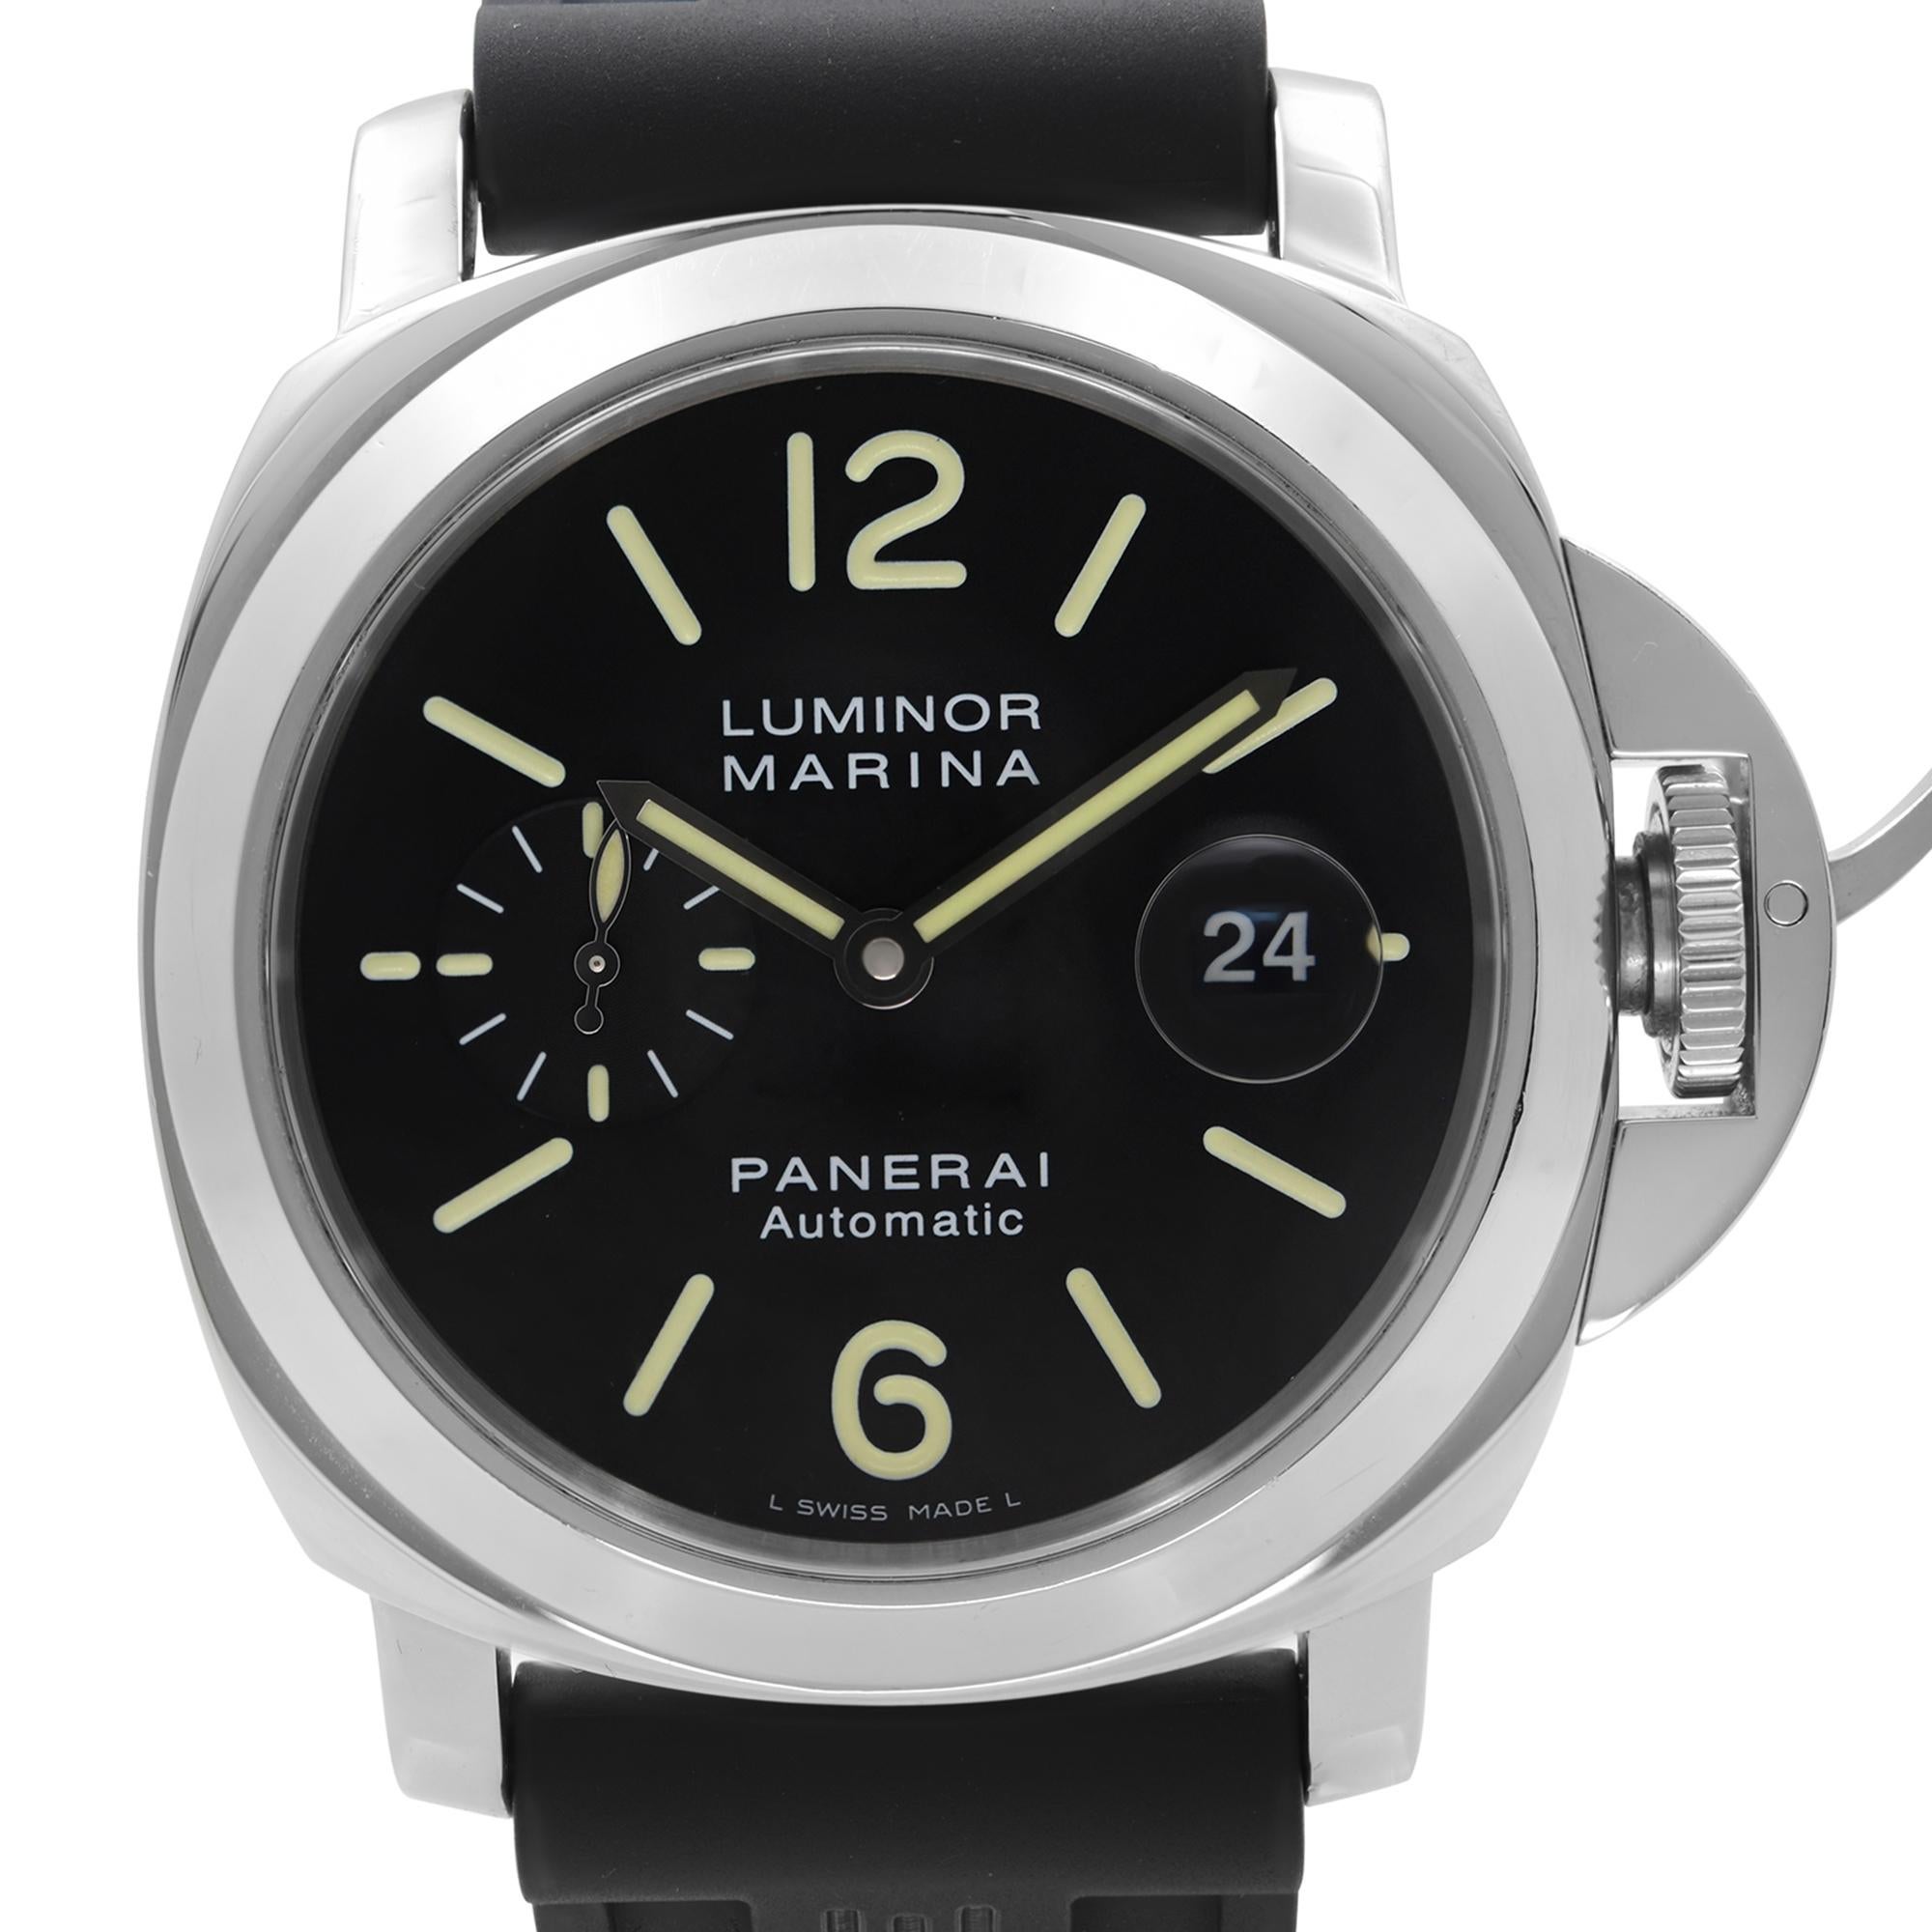 Pre-owned Panerai Luminor Marina Stainless Steel Automatic Black Dial Men's Watch PAM00104. This Watch was produced in 2005. This Beautiful Timepiece Features: Stainless Steel Case with a Black Rubber Strap, Fixed Stainless Steel Bezel, Black Dial